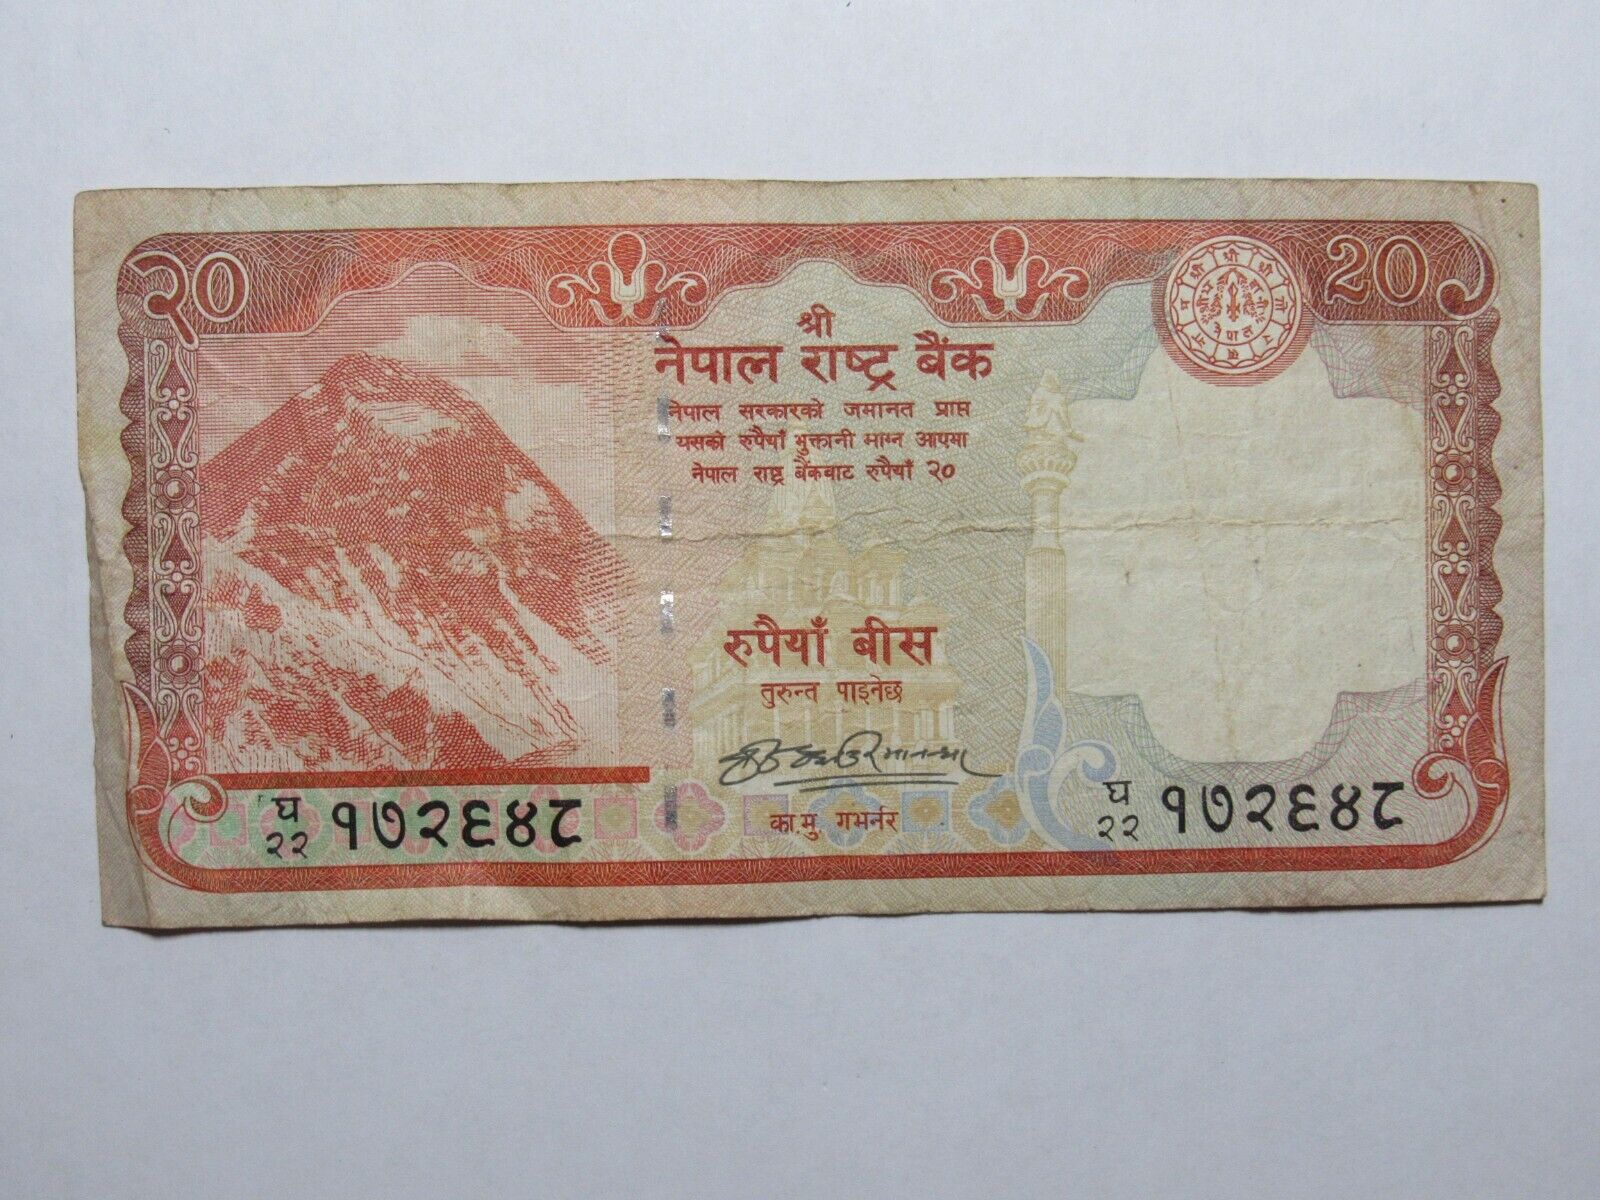 Old Nepal Paper Money Currency - 20 Rupees Stag Sig. 19? - Well Circulated